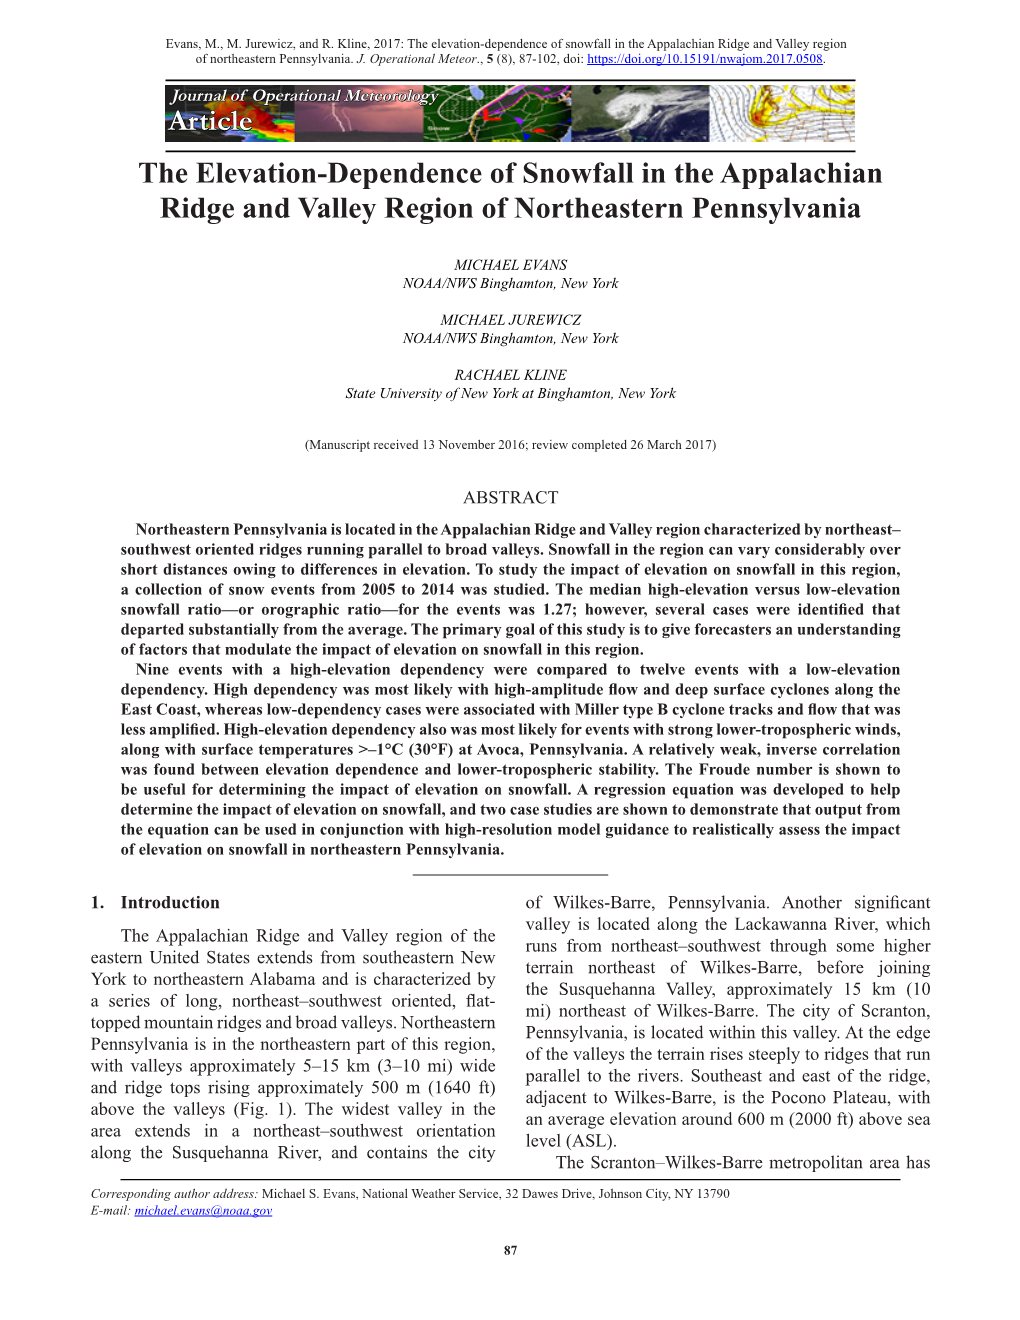 The Elevation-Dependence of Snowfall in the Appalachian Ridge and Valley Region of Northeastern Pennsylvania